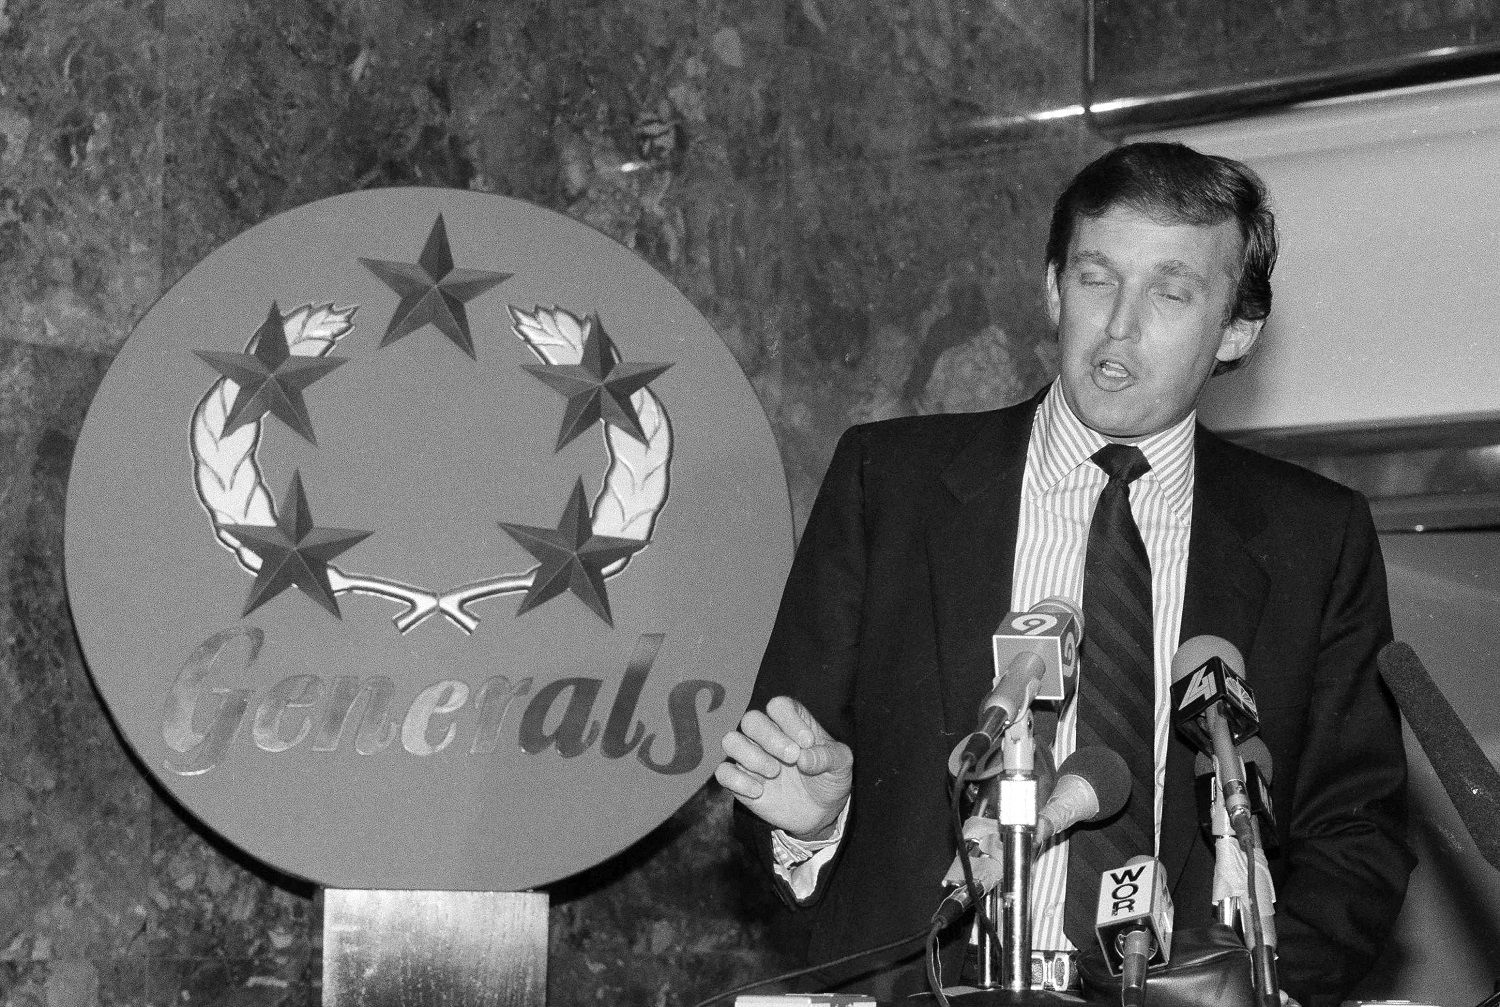 New Jersey Generals owner Donald Trump speaks to reporters after he and fellow United States Football League owners met in Teaneck, N.J., April 29, 1985. The owners reaffirmed their decision to switch to a fall schedule in 1986, but will do so without the Tampa Bay Bandits. (AP Photo/Marty Lederhandler)